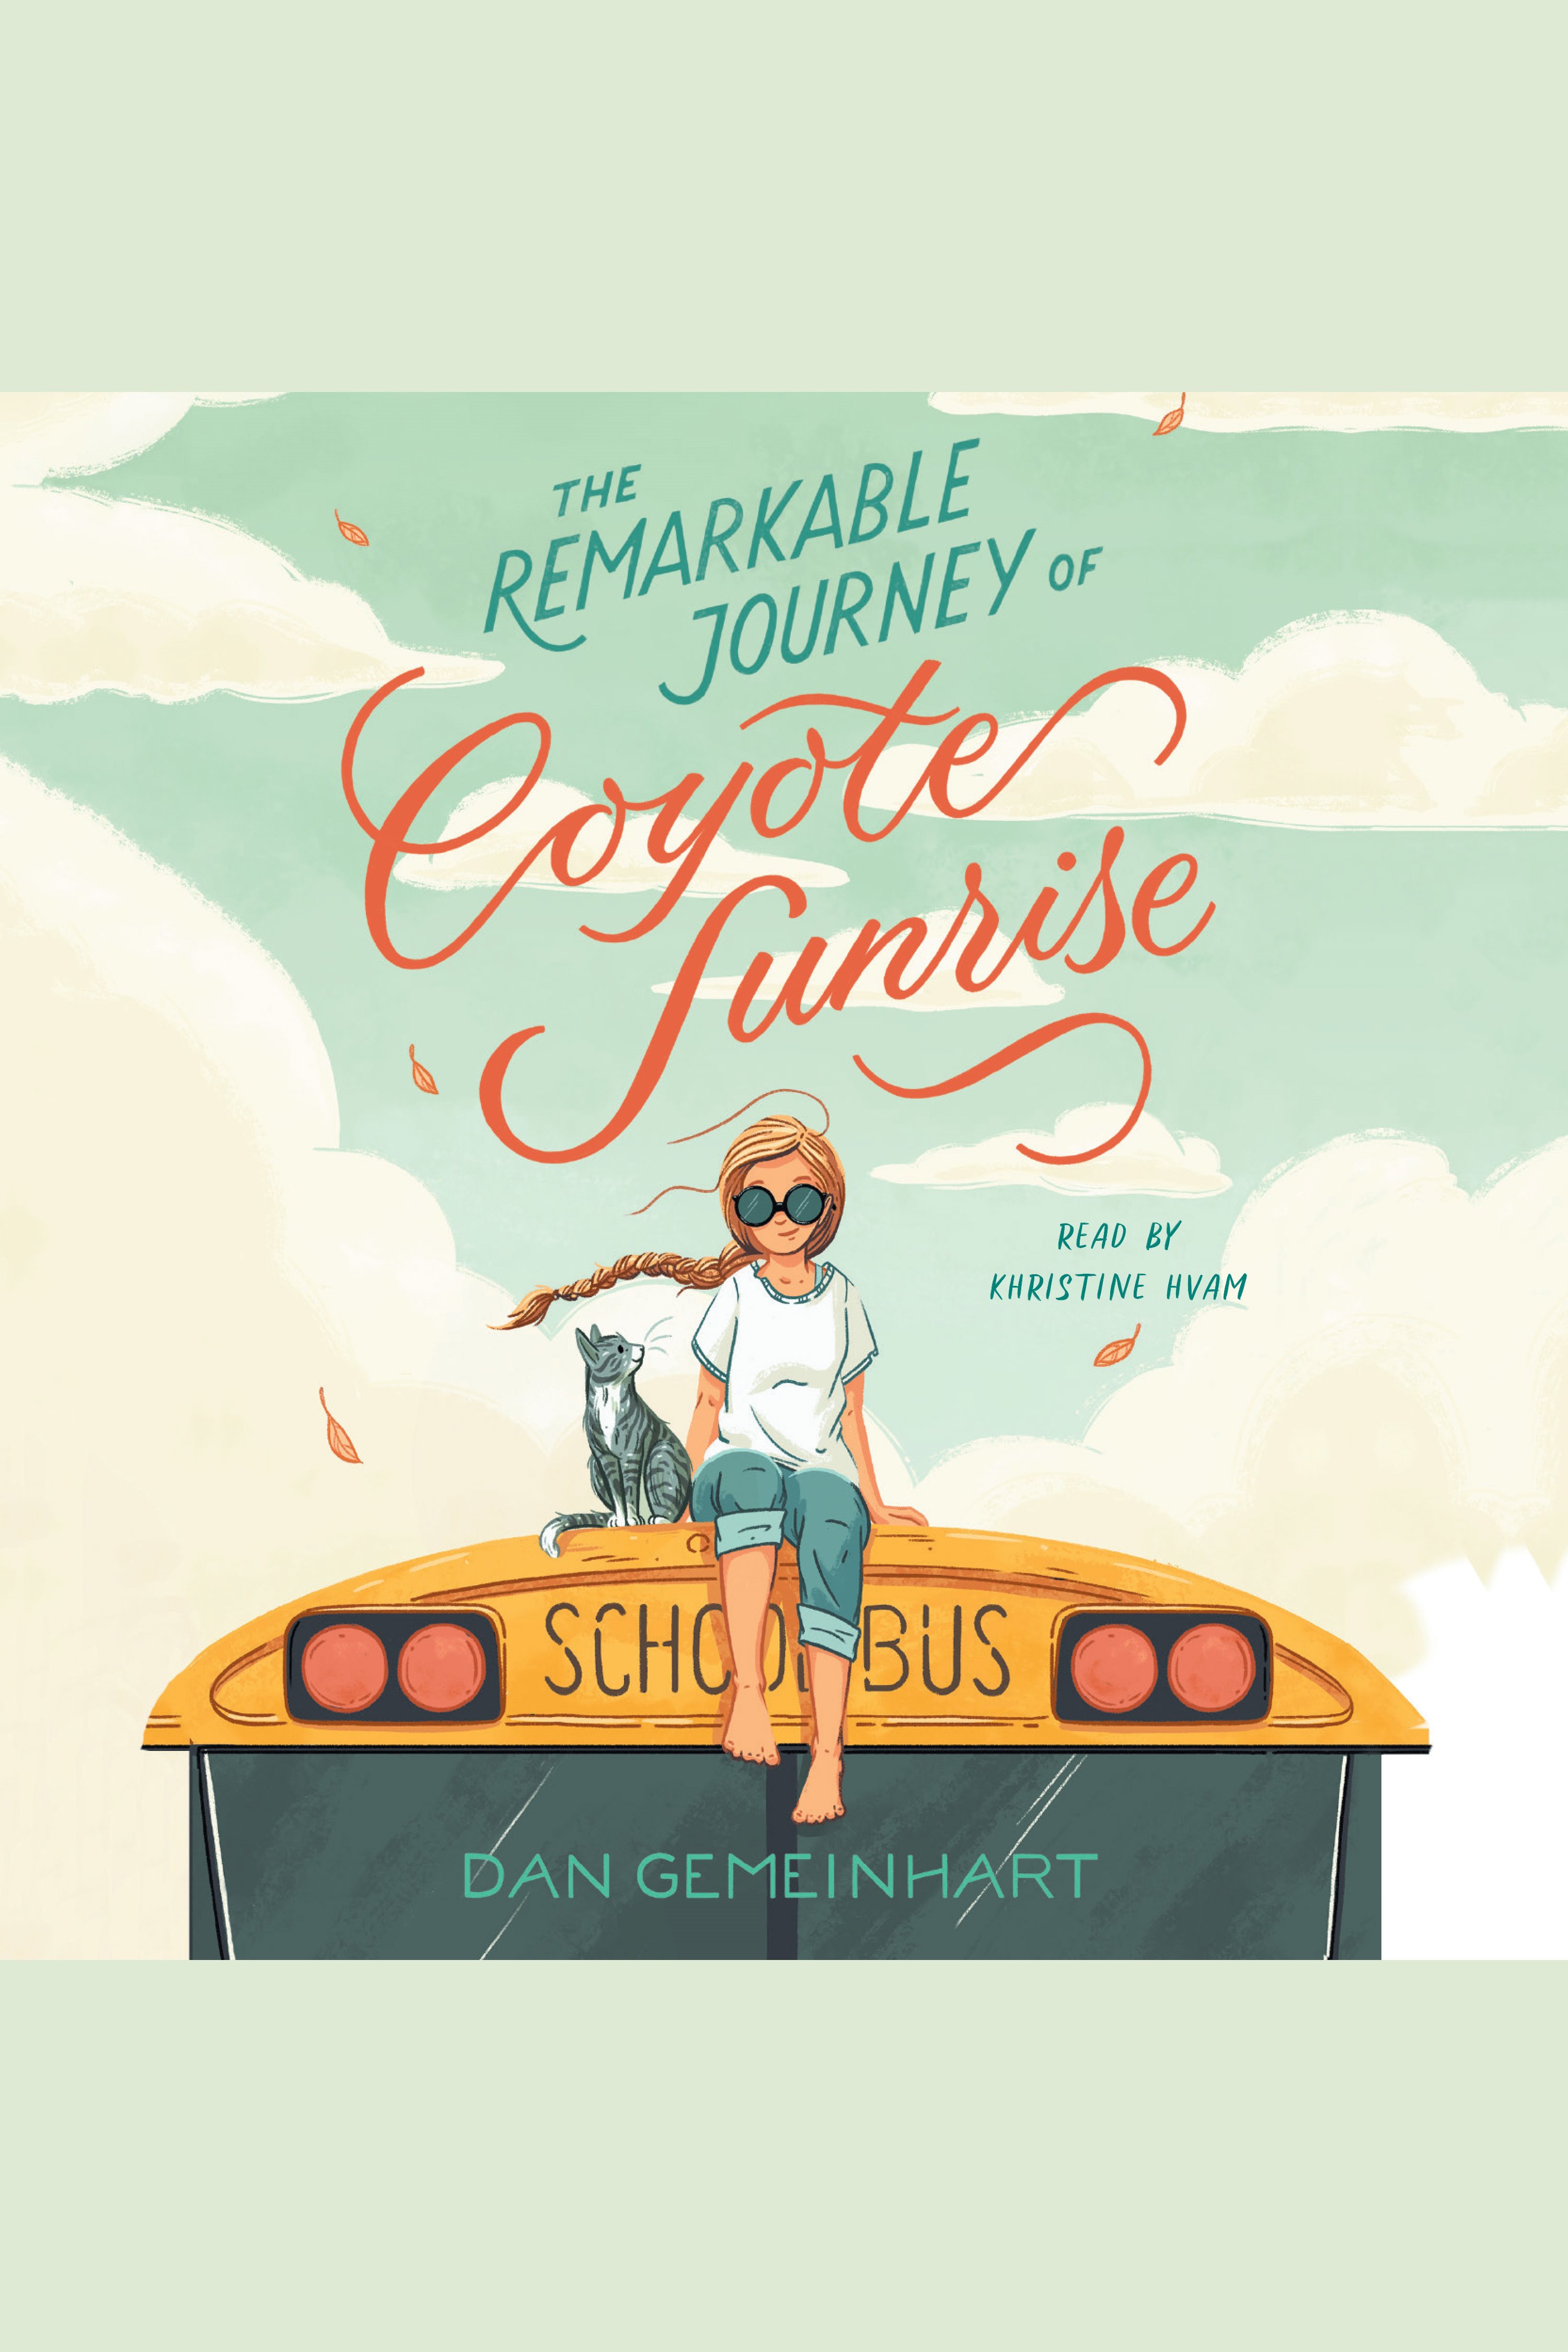 The Remarkable Journey of Coyote Sunrise cover image